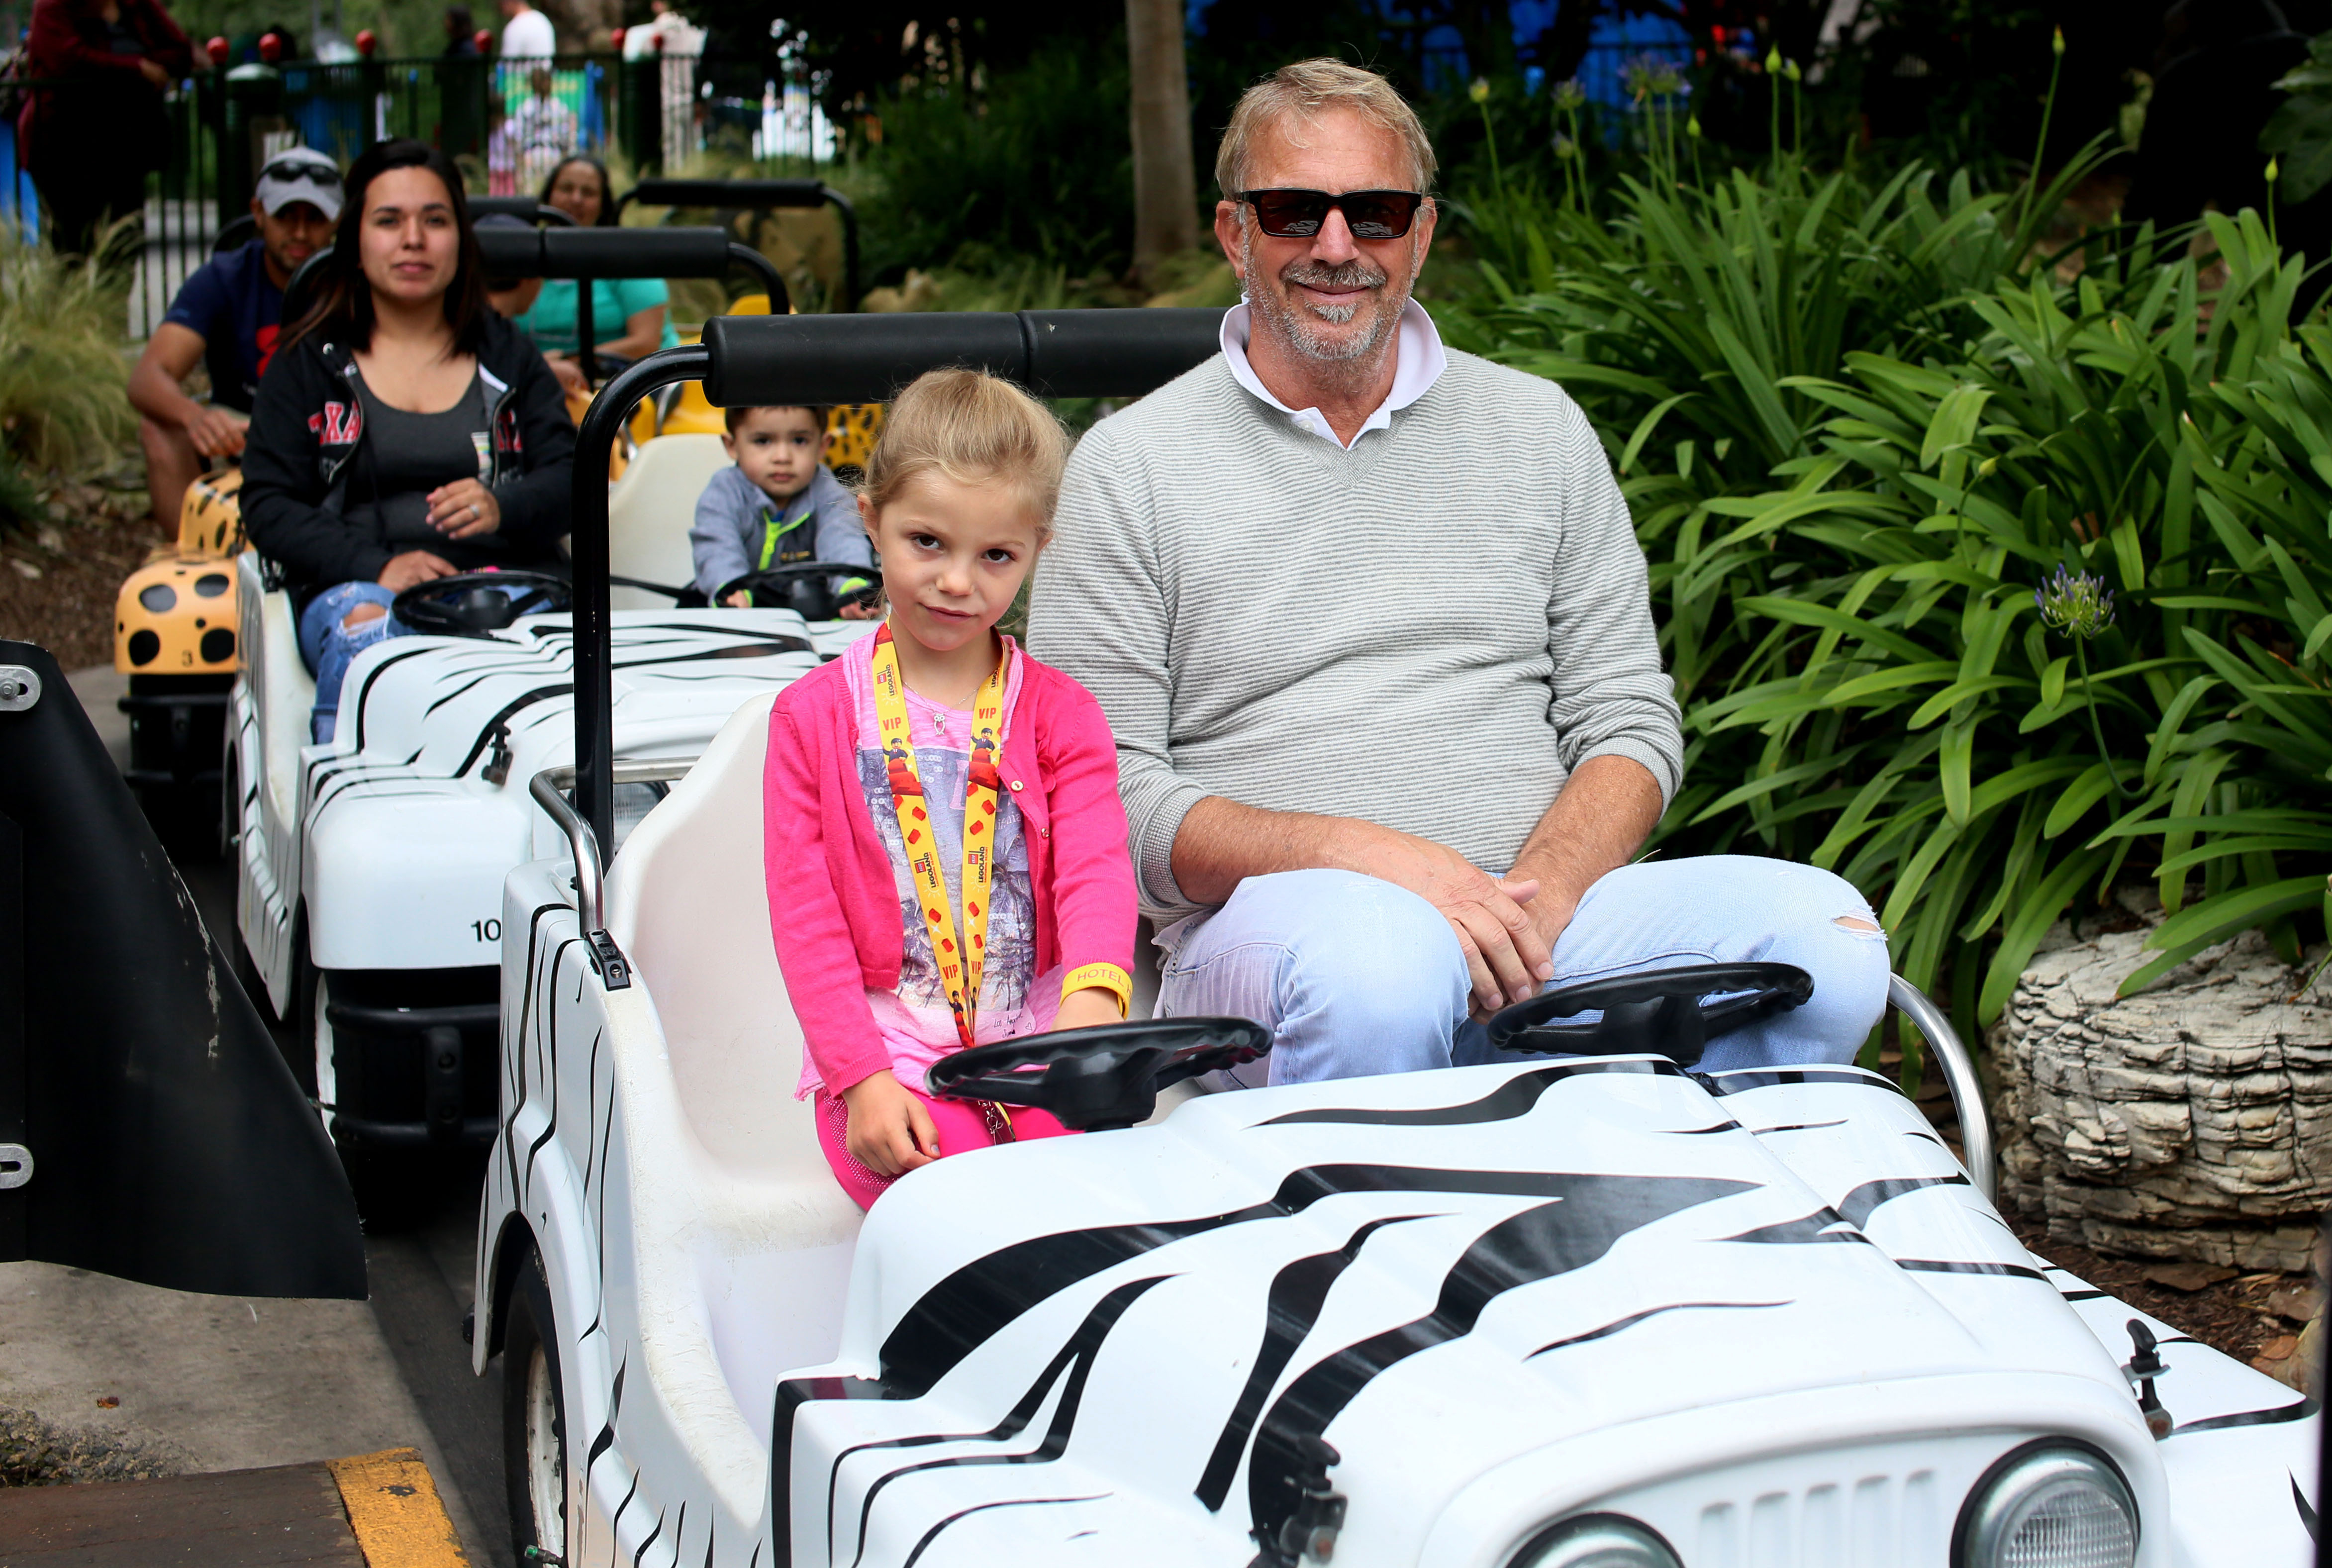 Kevin Costner on a ride with his daughter Grace at Legoland California on May 27, 2015, in Calsbad | Source: Getty Images